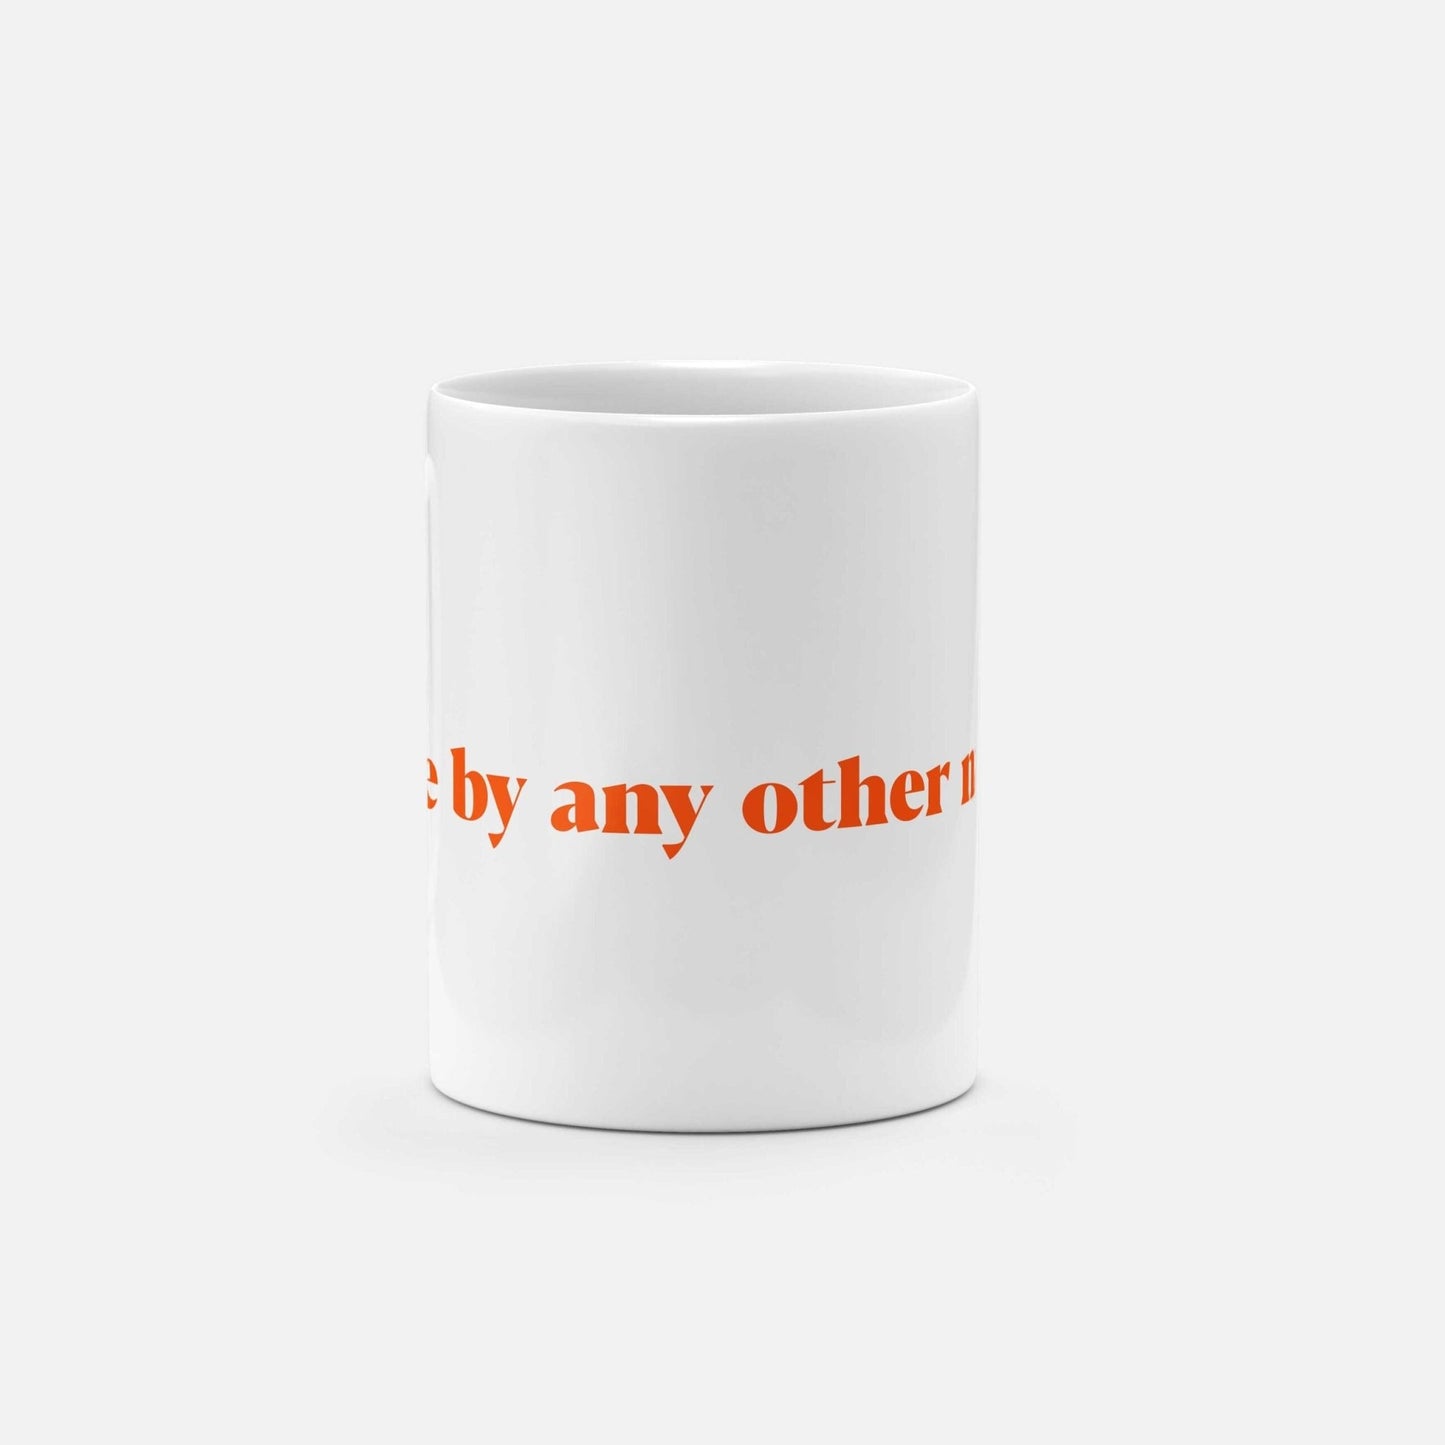 A Rose by Any Other Name 11oz Mug The Design Craft